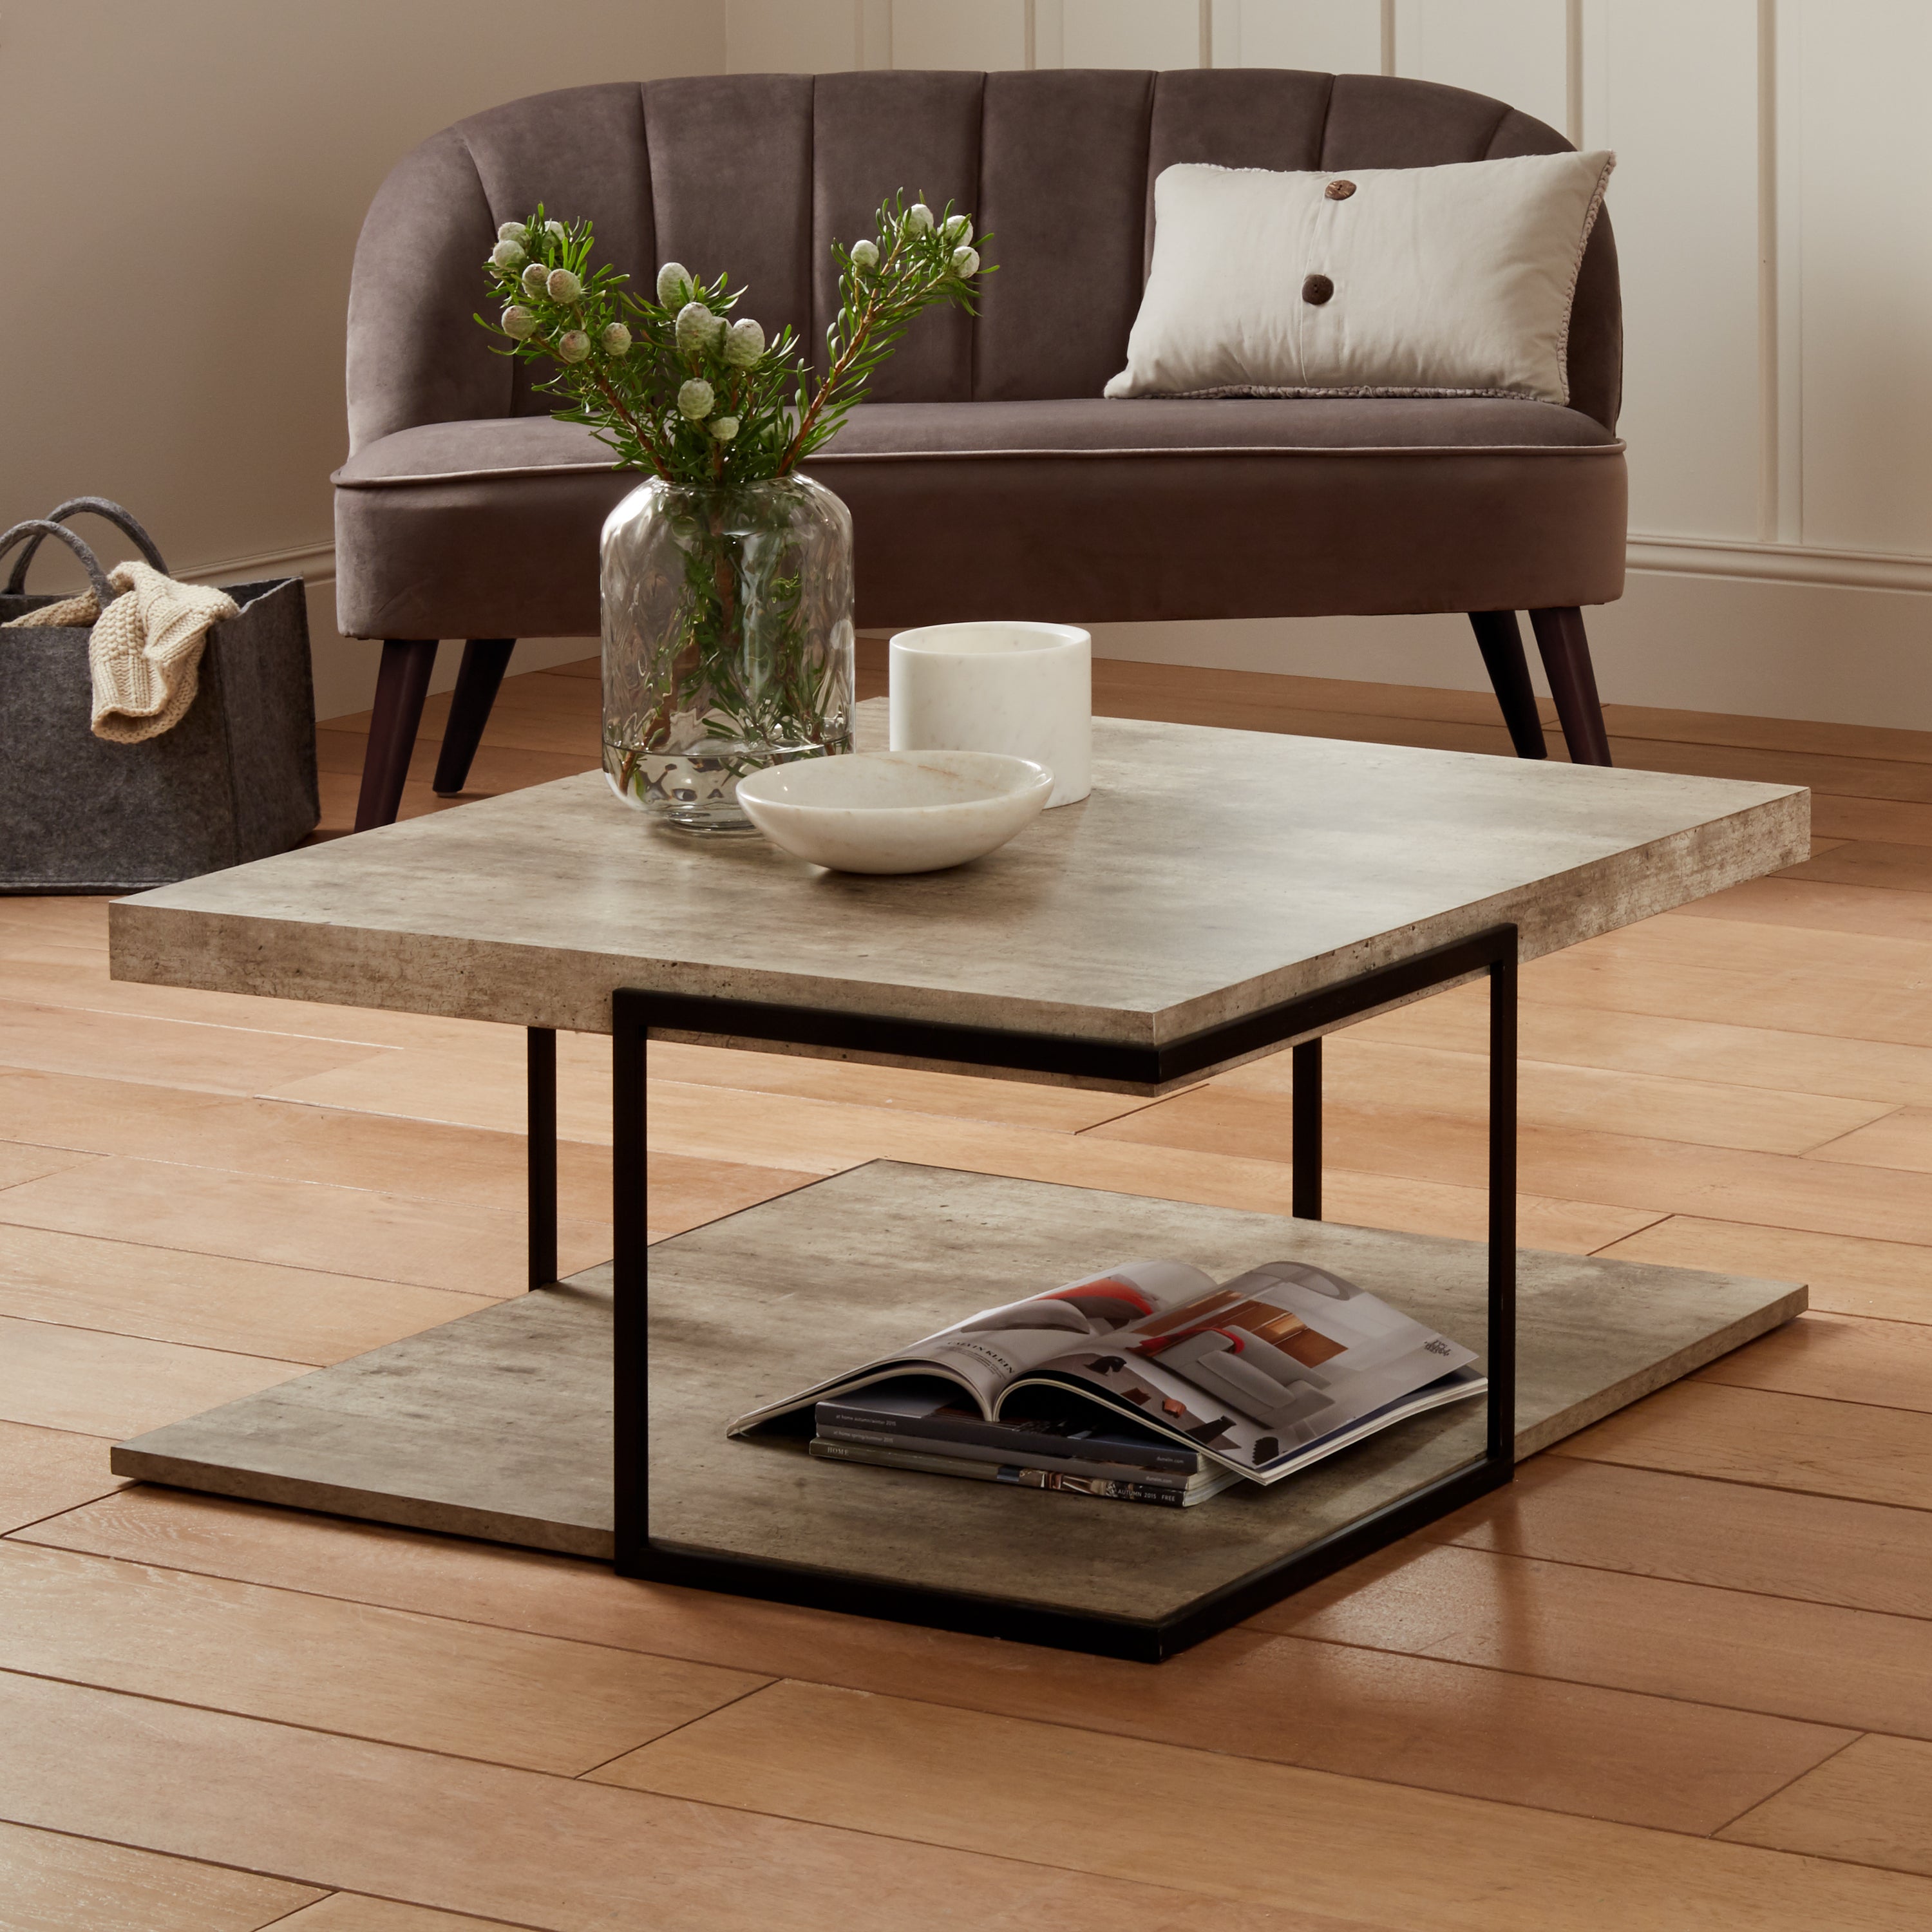 Pacific Jersey Lam Coffee Table Grey Wood Effect Grey